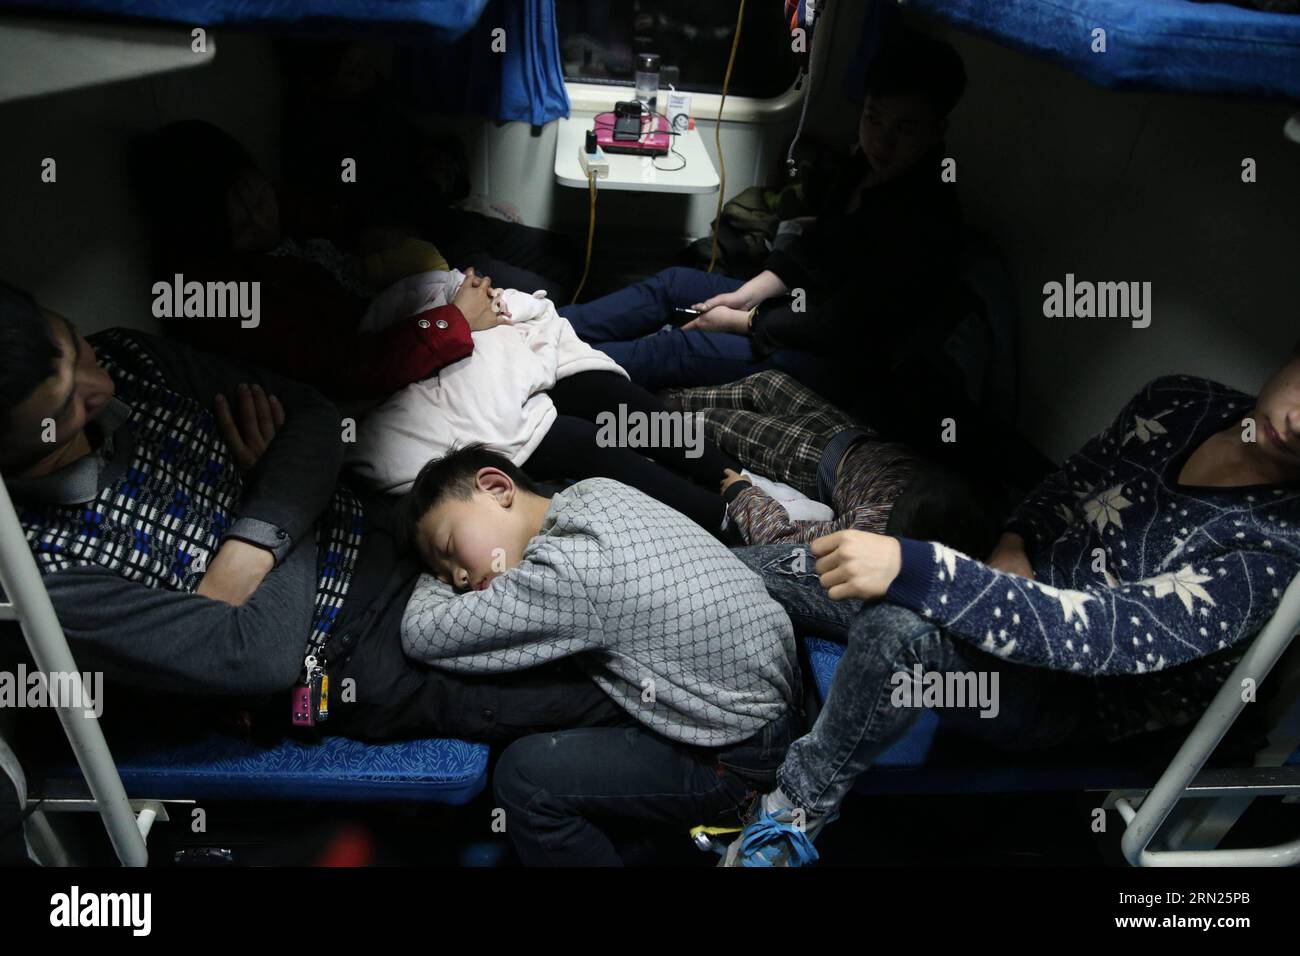 Passengers have a sleep on train 3663, which runs from east China s Shanghai to Chengdu, capital of southwest China s Sichuan Province, on Sept. 9, 2015. The Spring Festival, or the Chinese lunar New Year which starts from Feb. 19 this year, is known as the world s biggest migration, with millions of people traveling vast distances for family reunions. Ding Ting) (lfj) CHINA-SPRING FESTIVAL-HOME RETURNING (CN) PeixXin PUBLICATIONxNOTxINxCHN   Passengers have a Sleep ON Train 3663 Which runs from East China S Shanghai to Chengdu Capital of Southwest China S Sichuan Province ON Sept 9 2015 The S Stock Photo